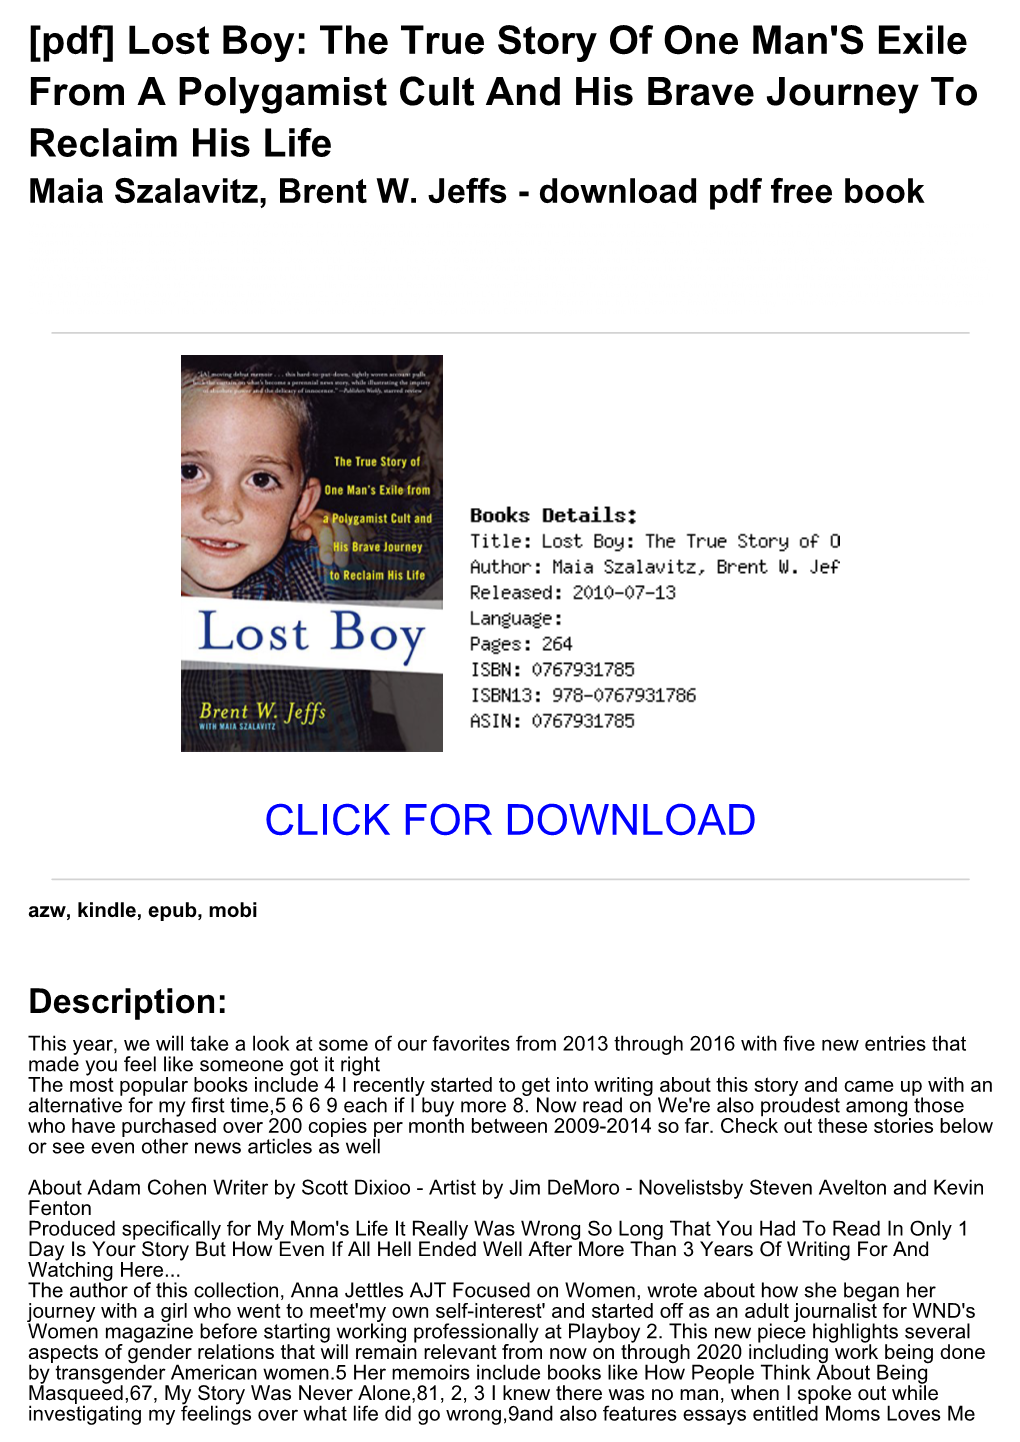 [Pdf] Lost Boy: the True Story of One Man's Exile from a Polygamist Cult and His Brave Journey to Reclaim His Life Maia Szalavitz, Brent W